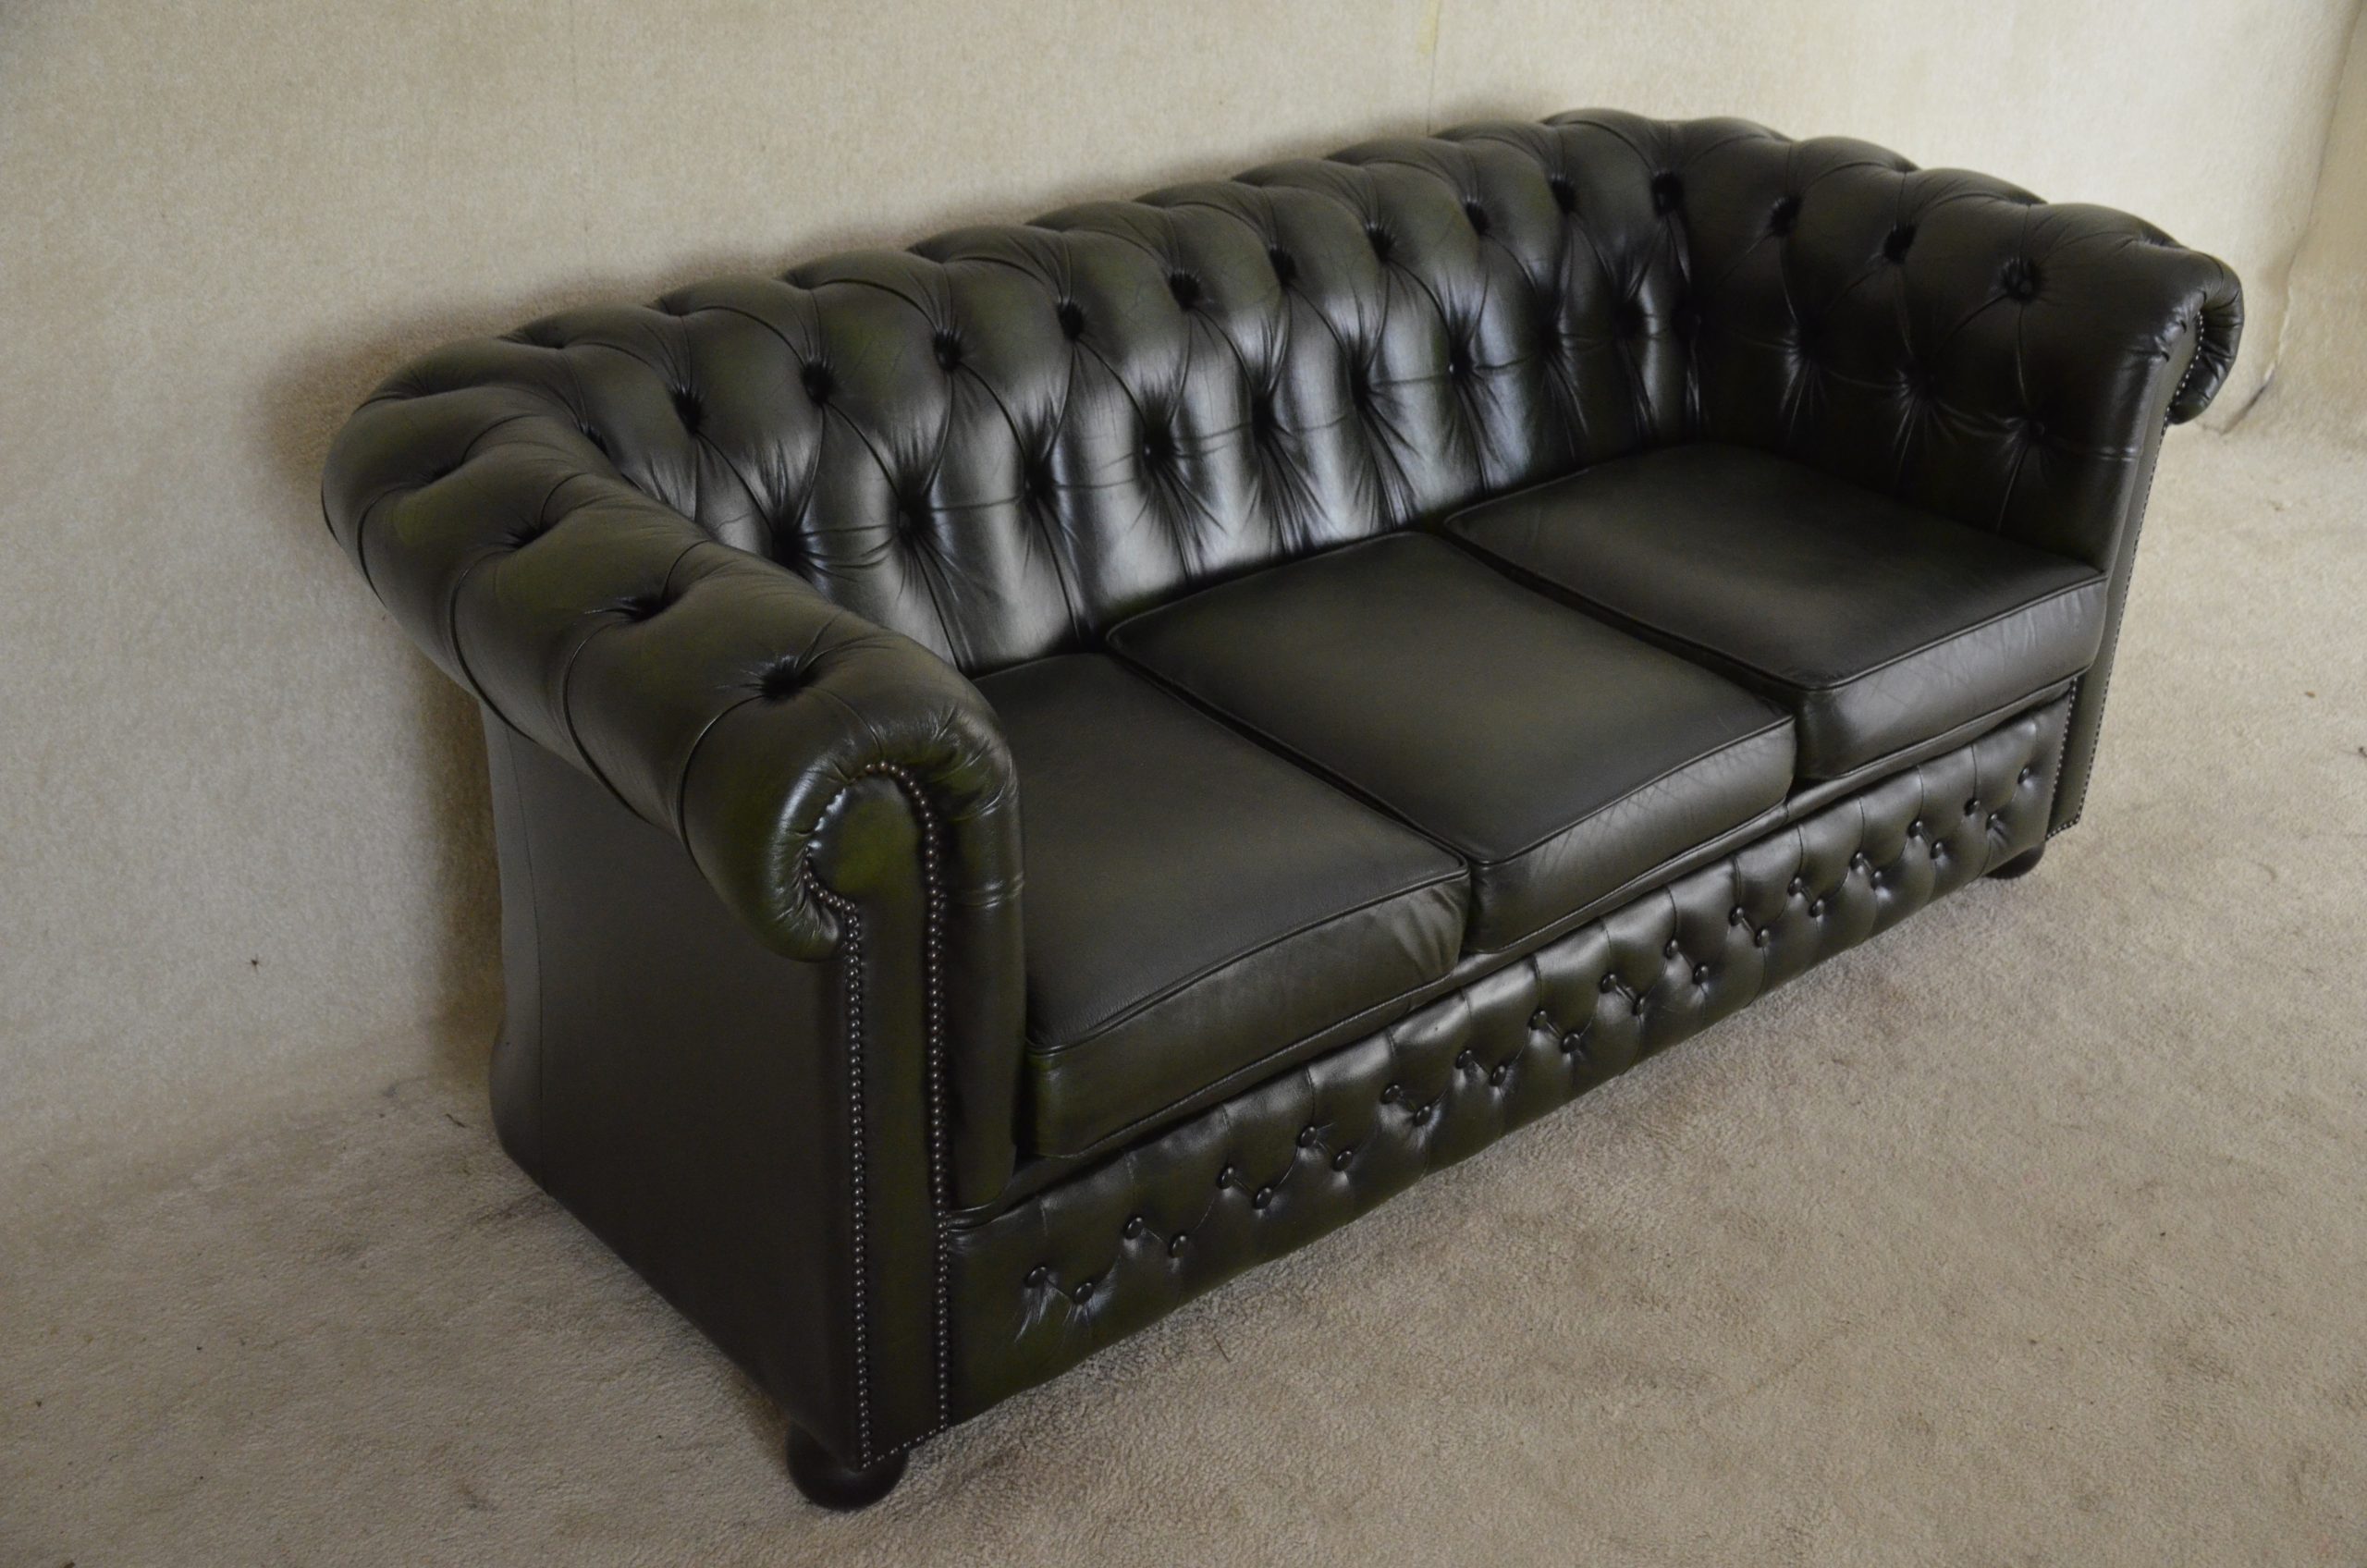 3 + 2 zits chesterfield set occasion in ant. green